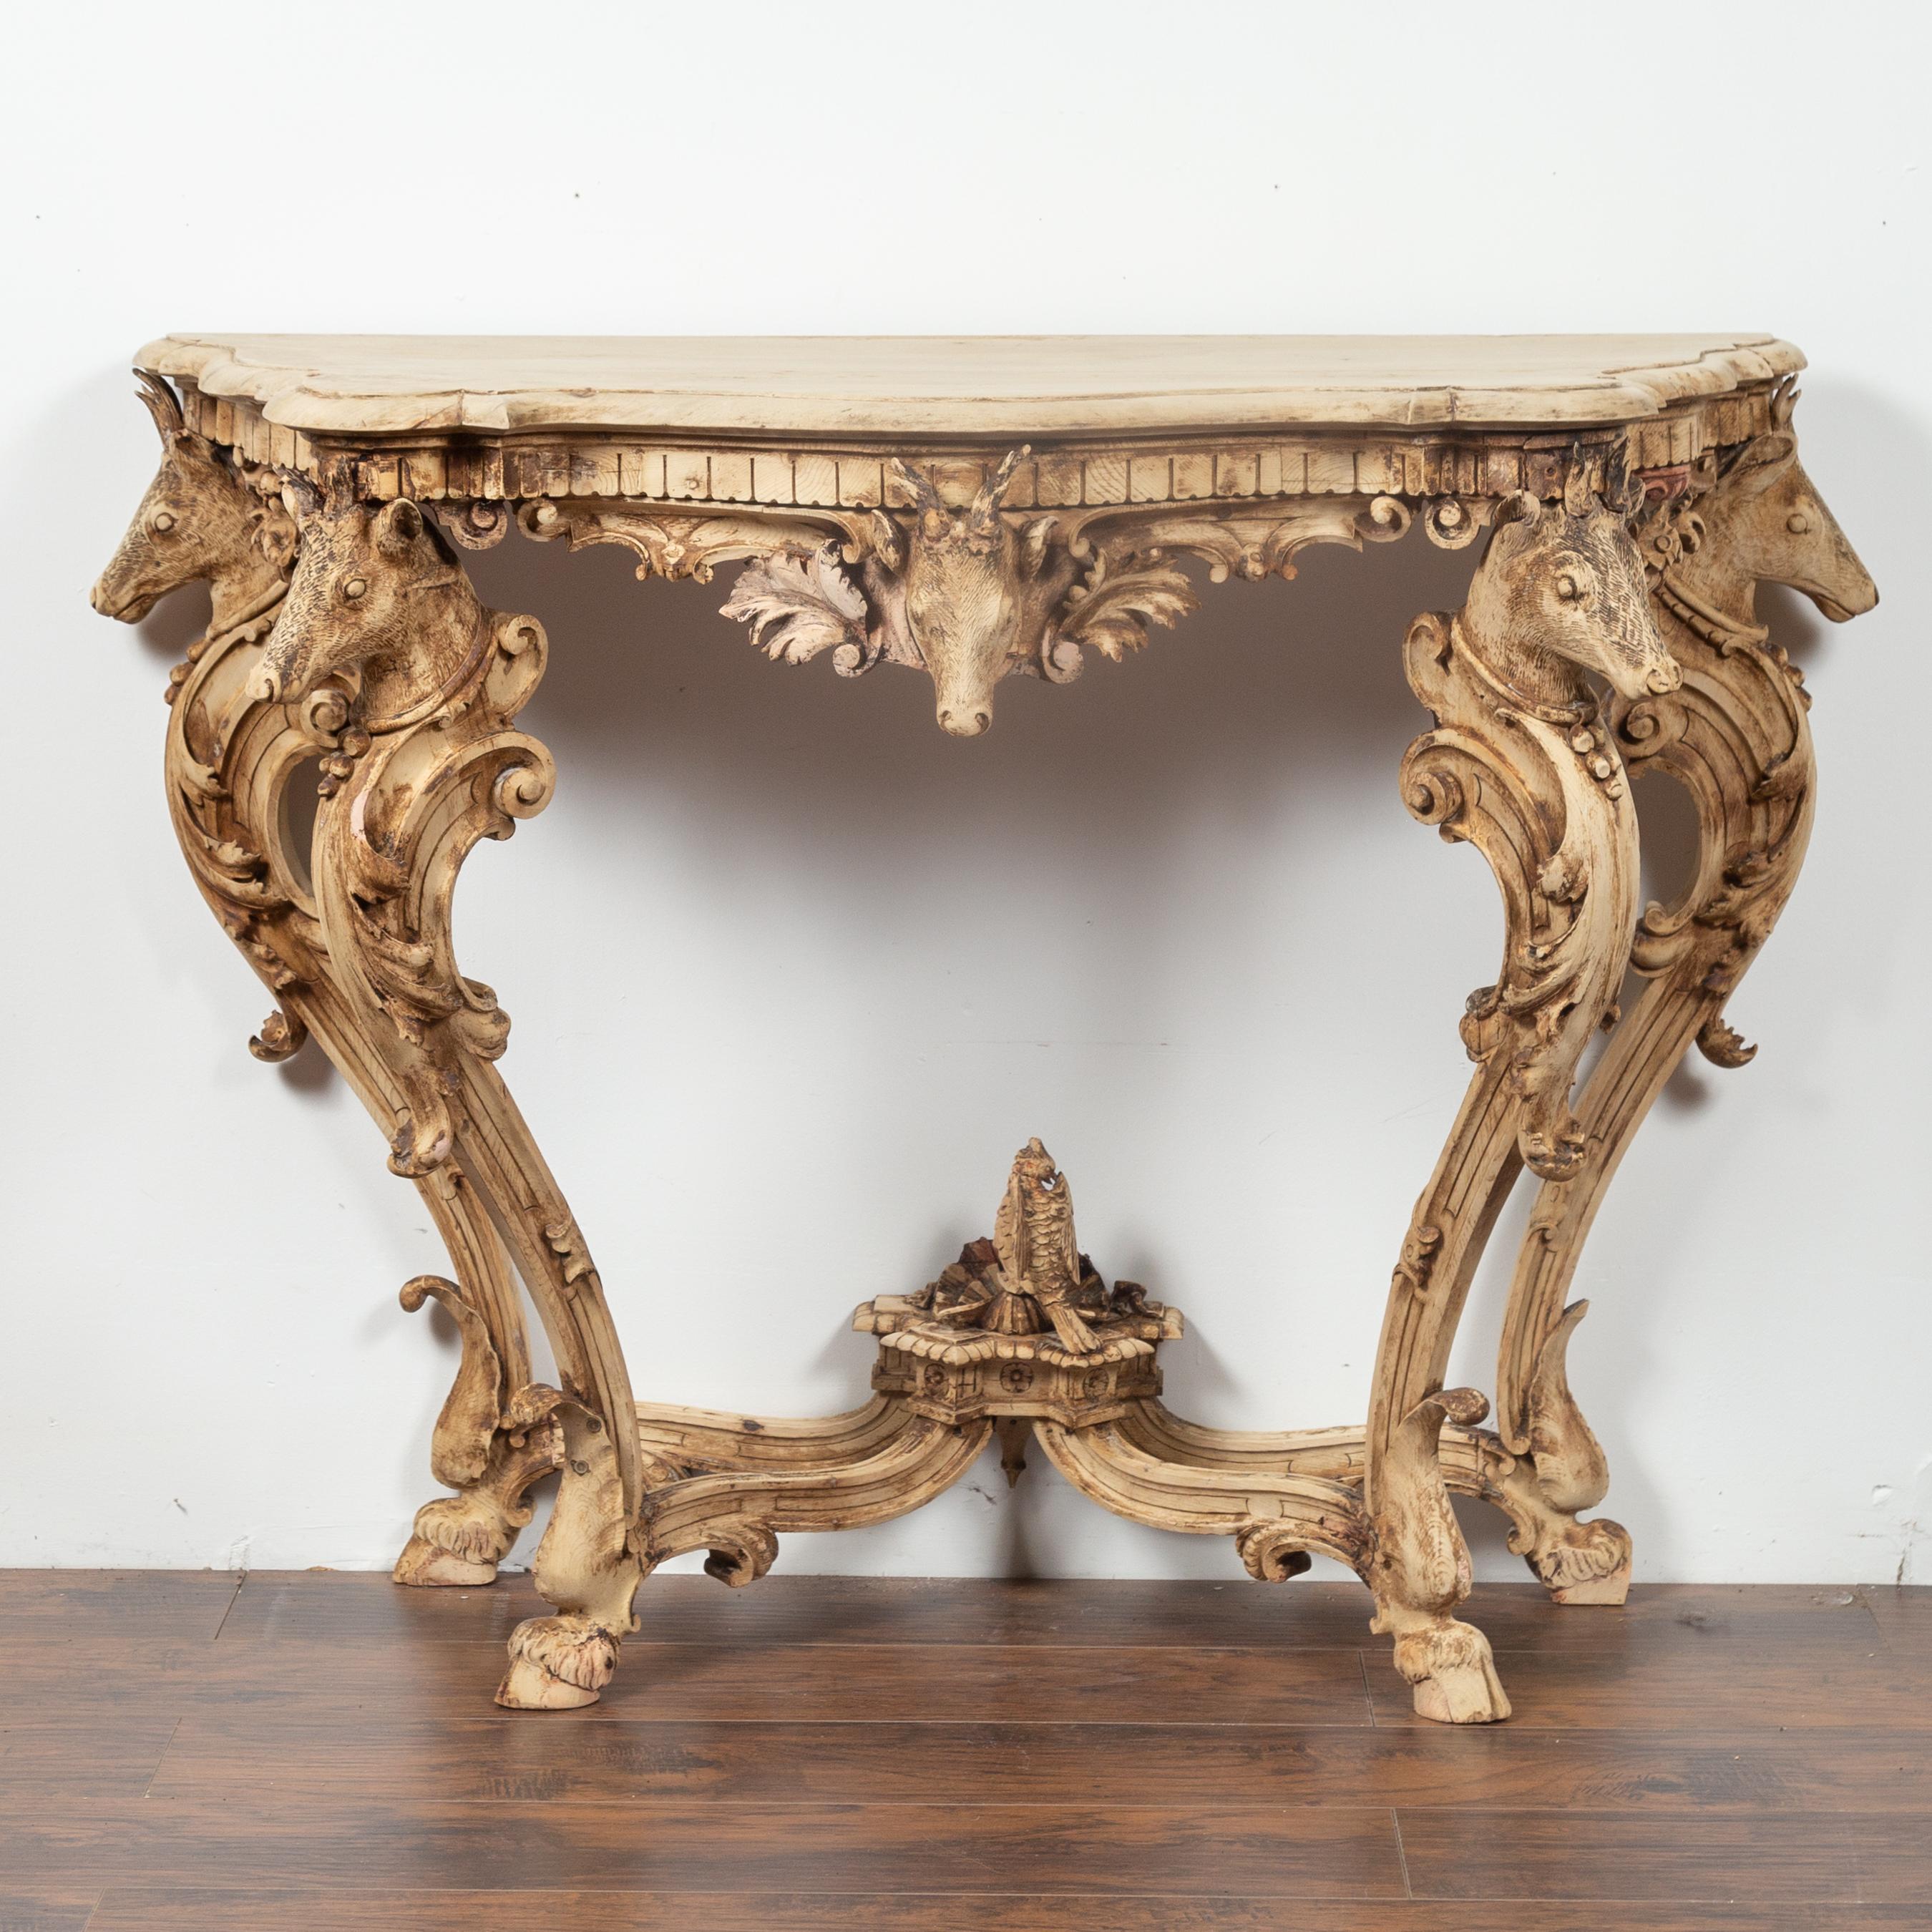 An English Rococo style carved and bleached oak console table with deer heads and hoofed legs from the late 19th century. This English console table features a nicely shaped planked top with beveled edges, sitting above an exquisite Rococo style